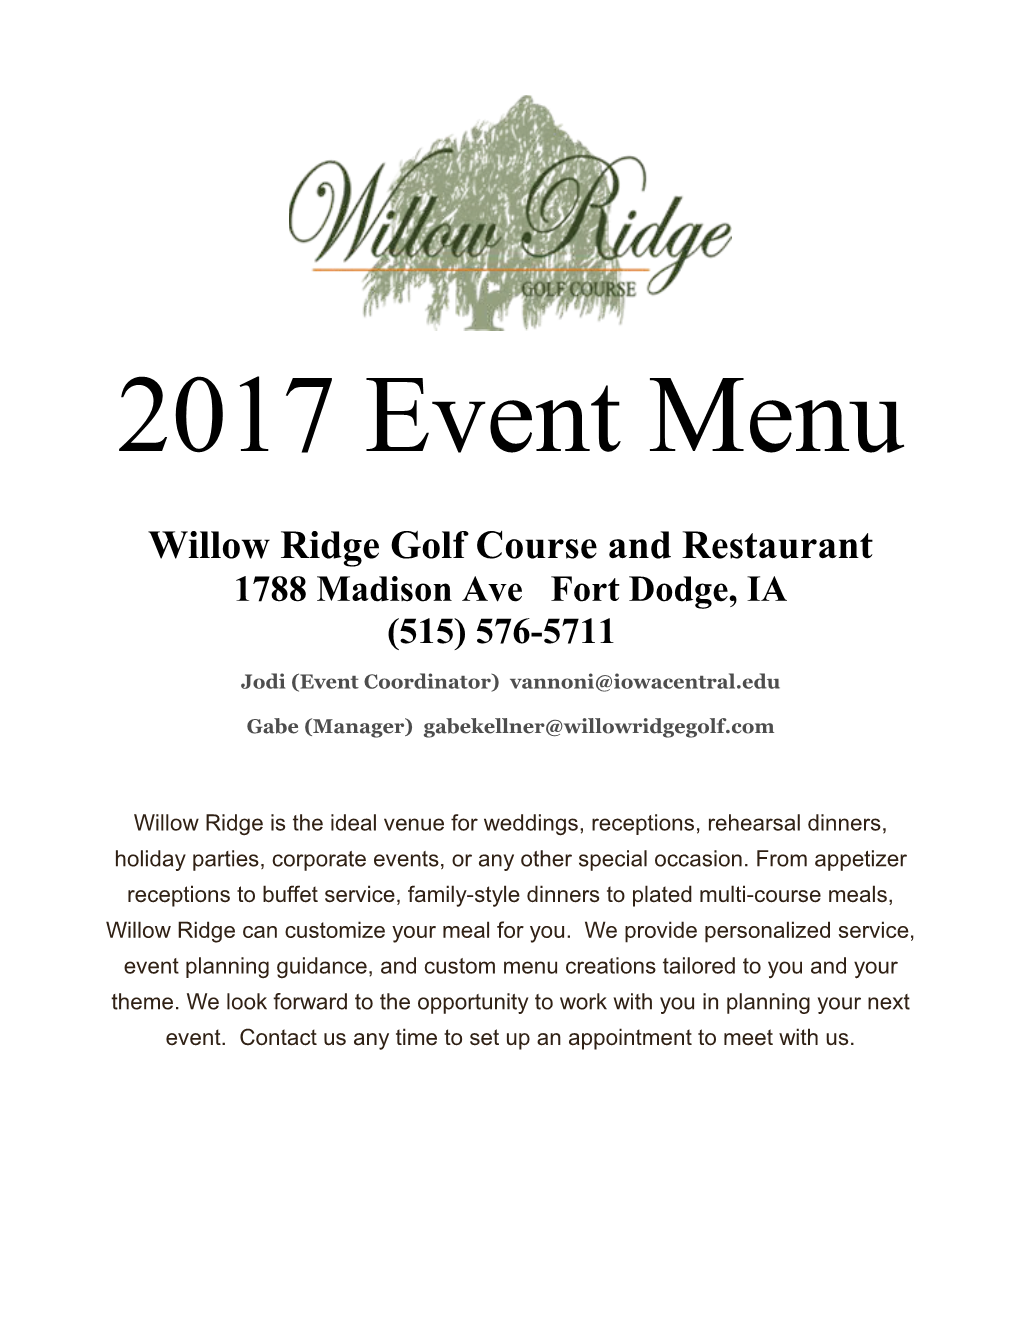 Willow Ridge Golf Course and Restaurant